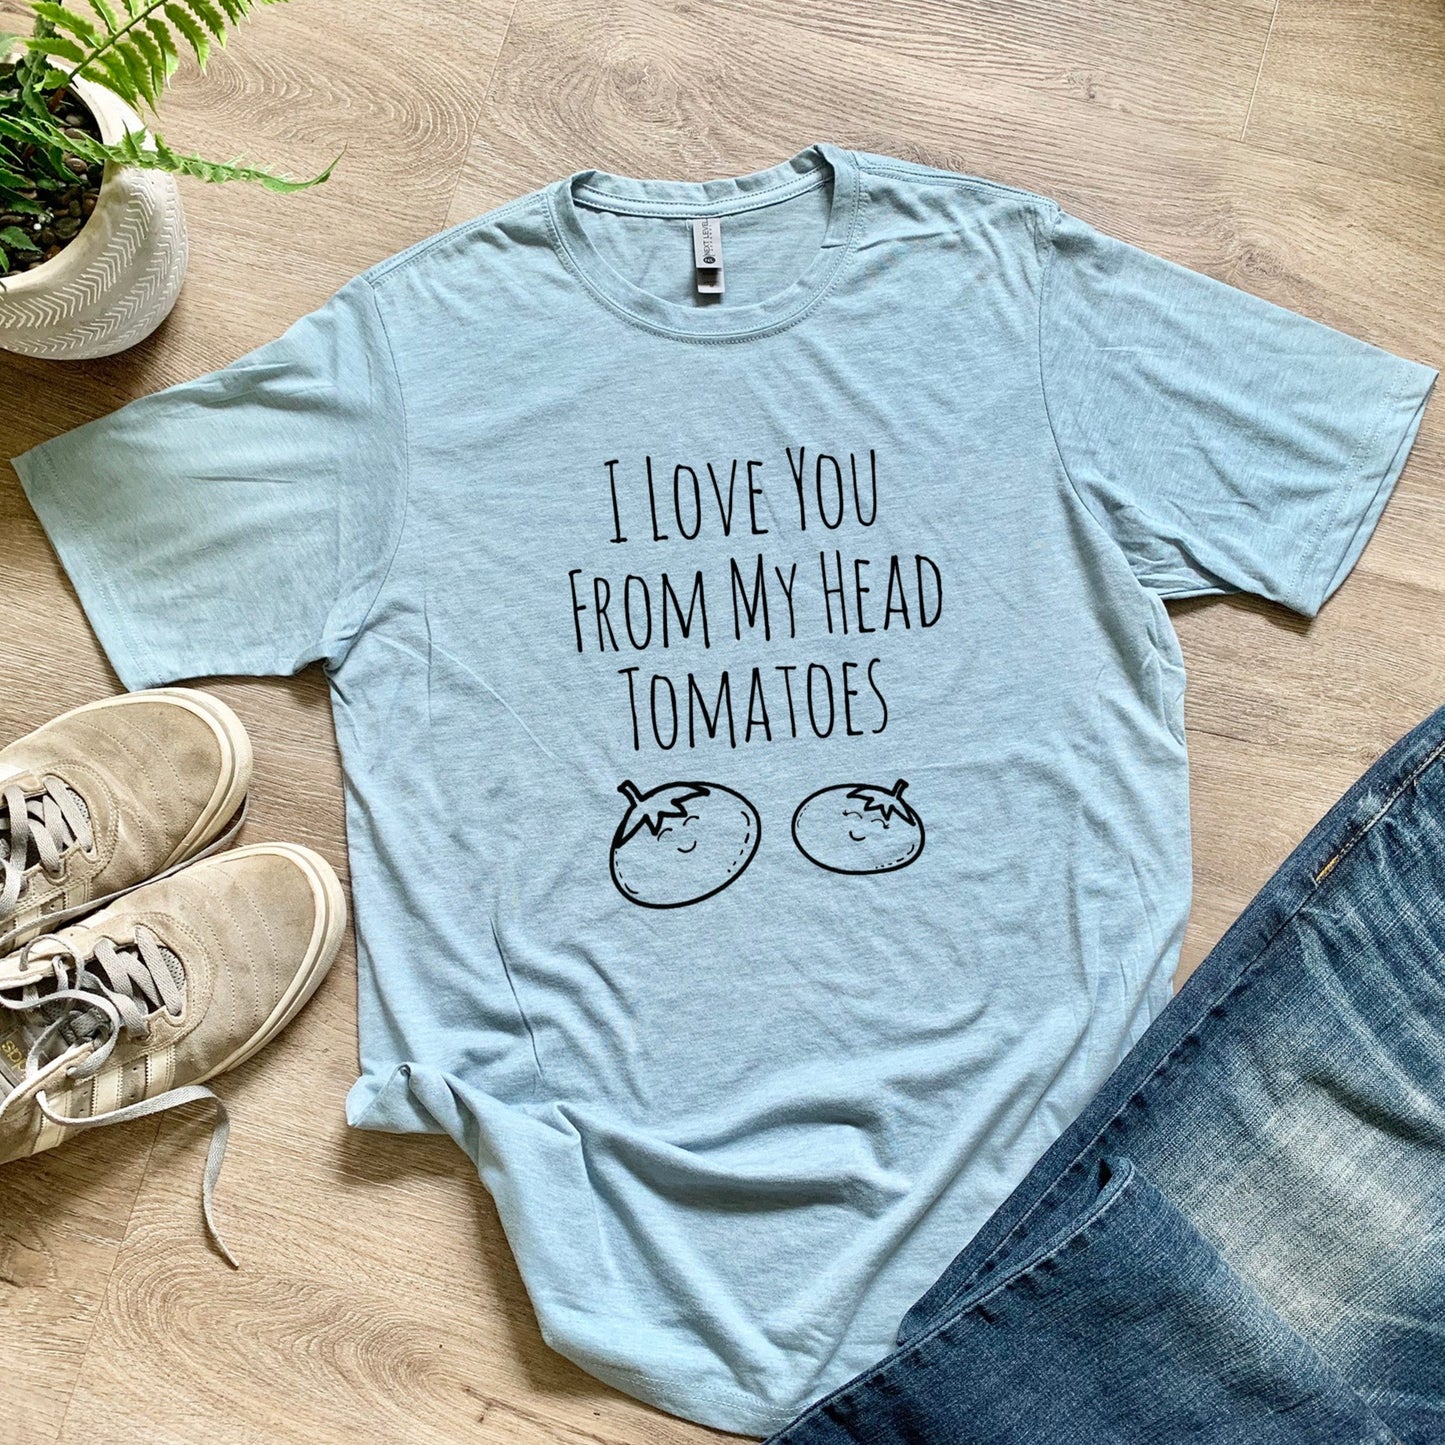 I Love You From My Head Tomatoes - Men's / Unisex Tee - Stonewash Blue or Sage